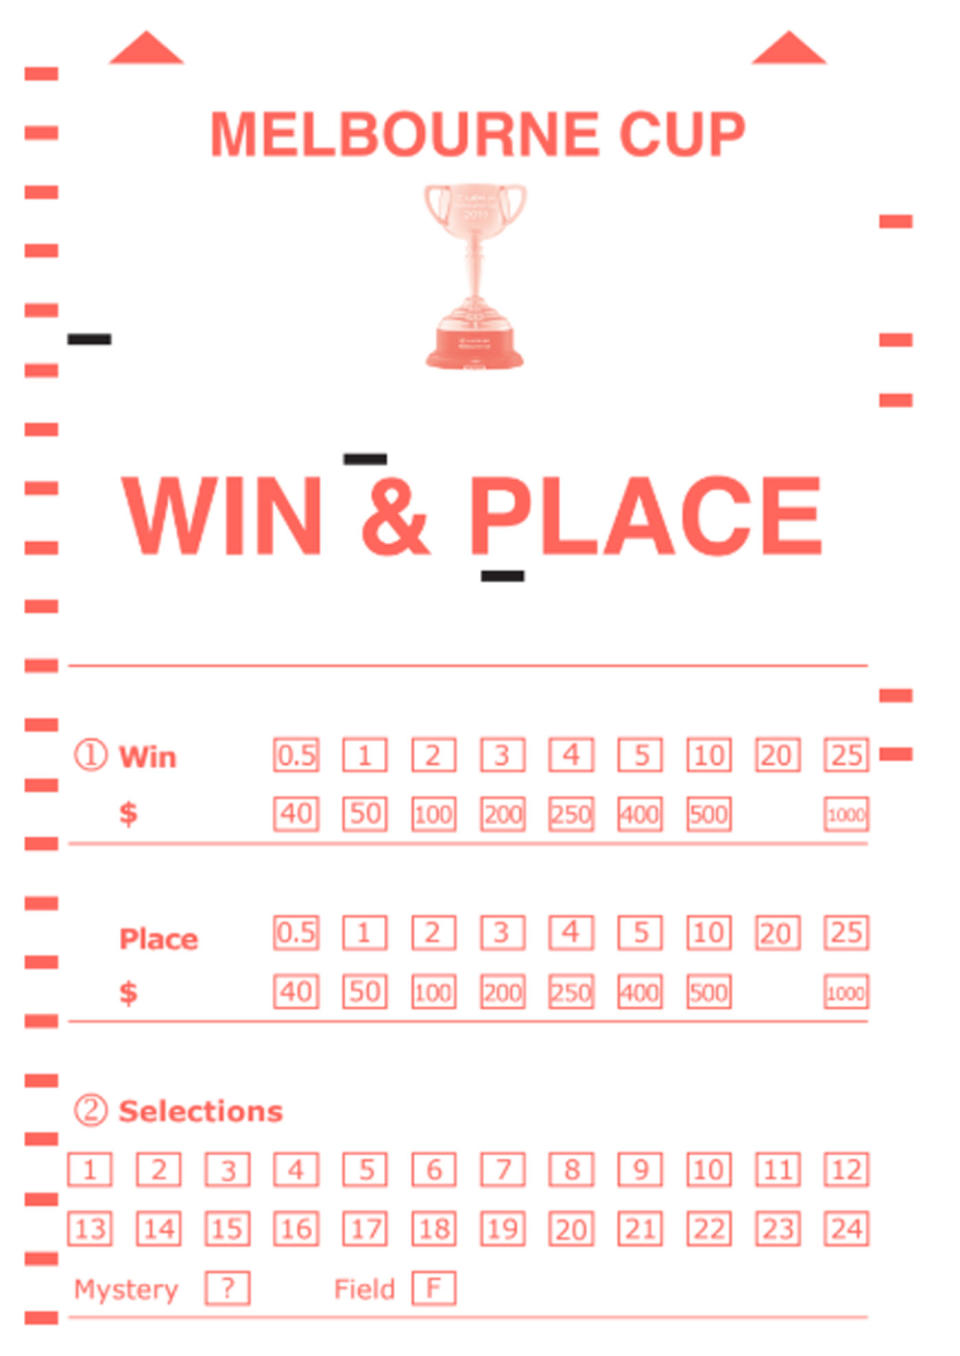 A TAB win and place Melbourne Cup ticket.